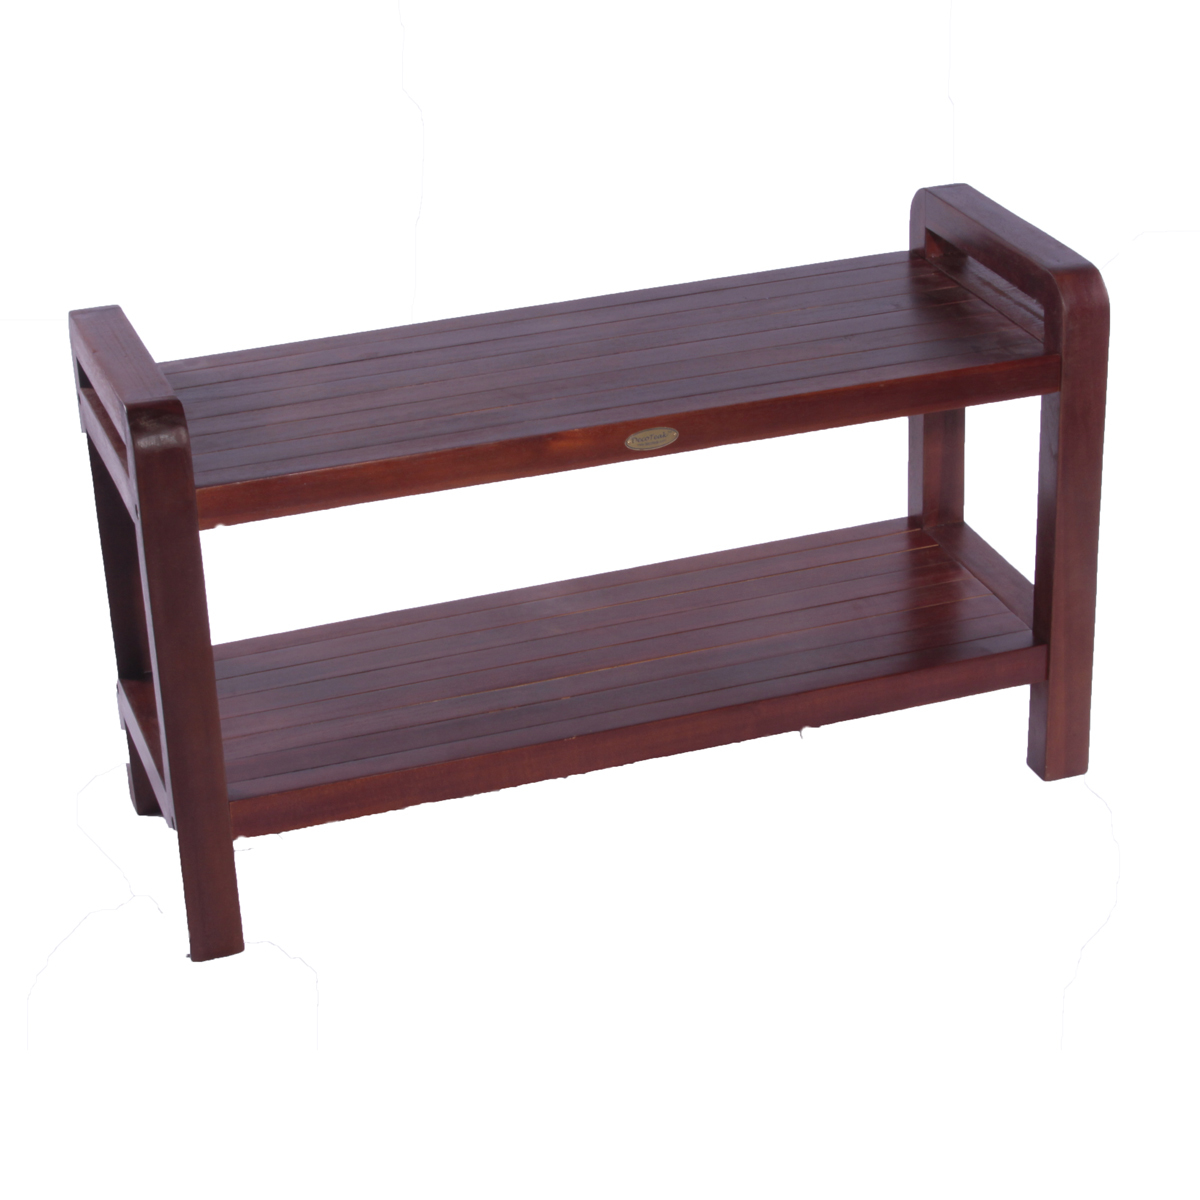 DT110 35" Classic Teak Extended Shower Bench with Shelf and Arms